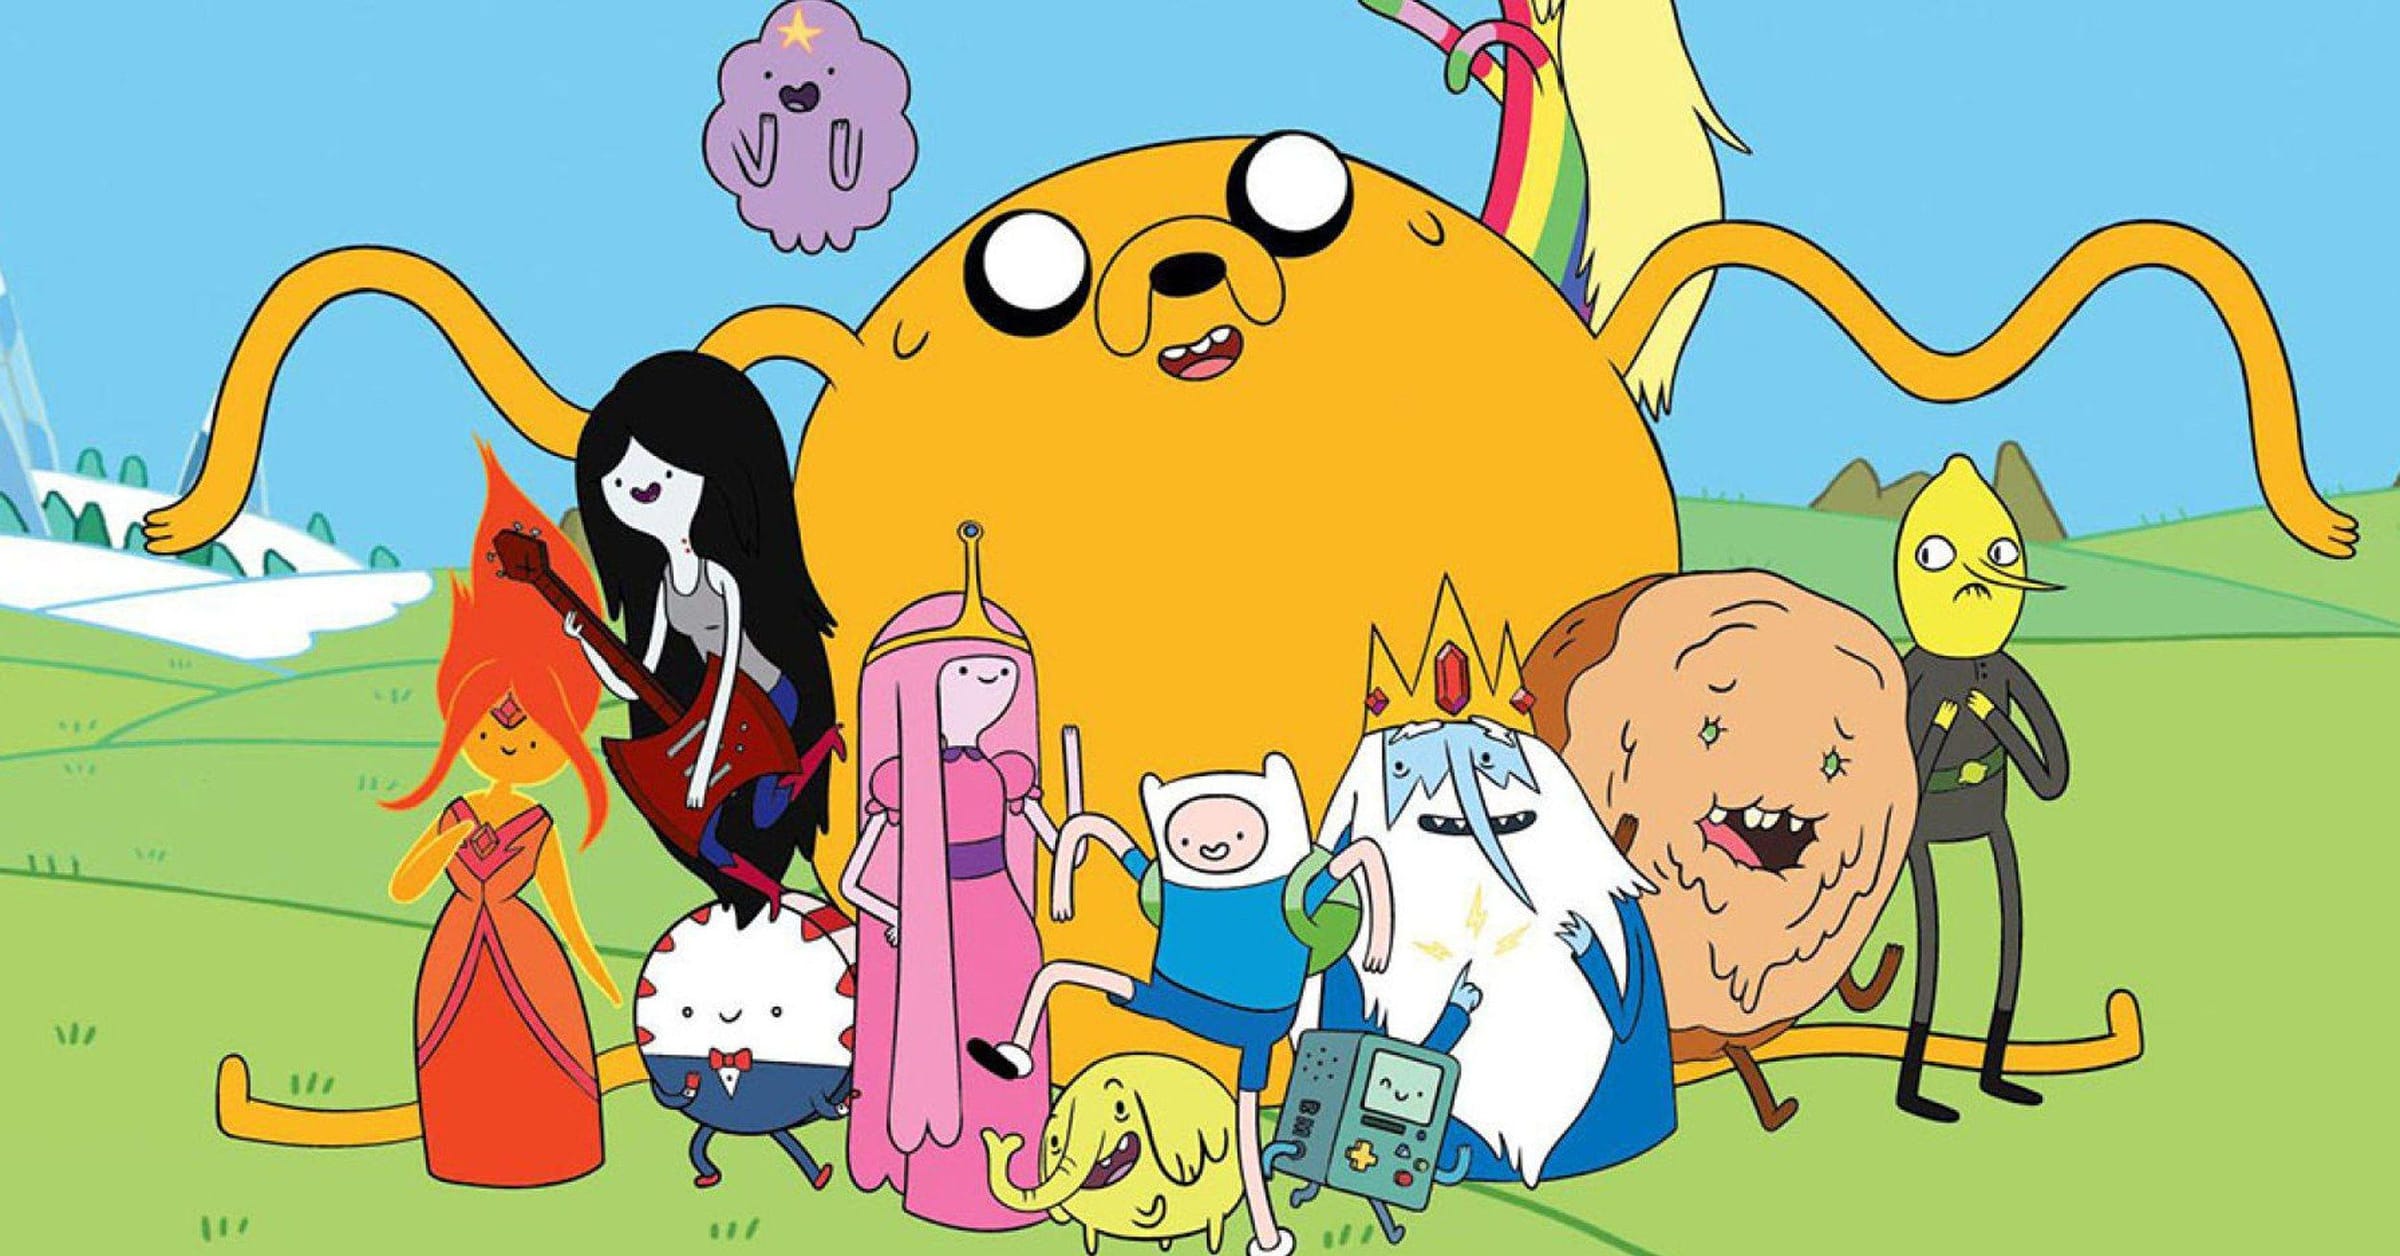 Adventure Time Princess Bubblegum Sexy Feet - Adult Jokes You Never Noticed In 'Adventure Time'